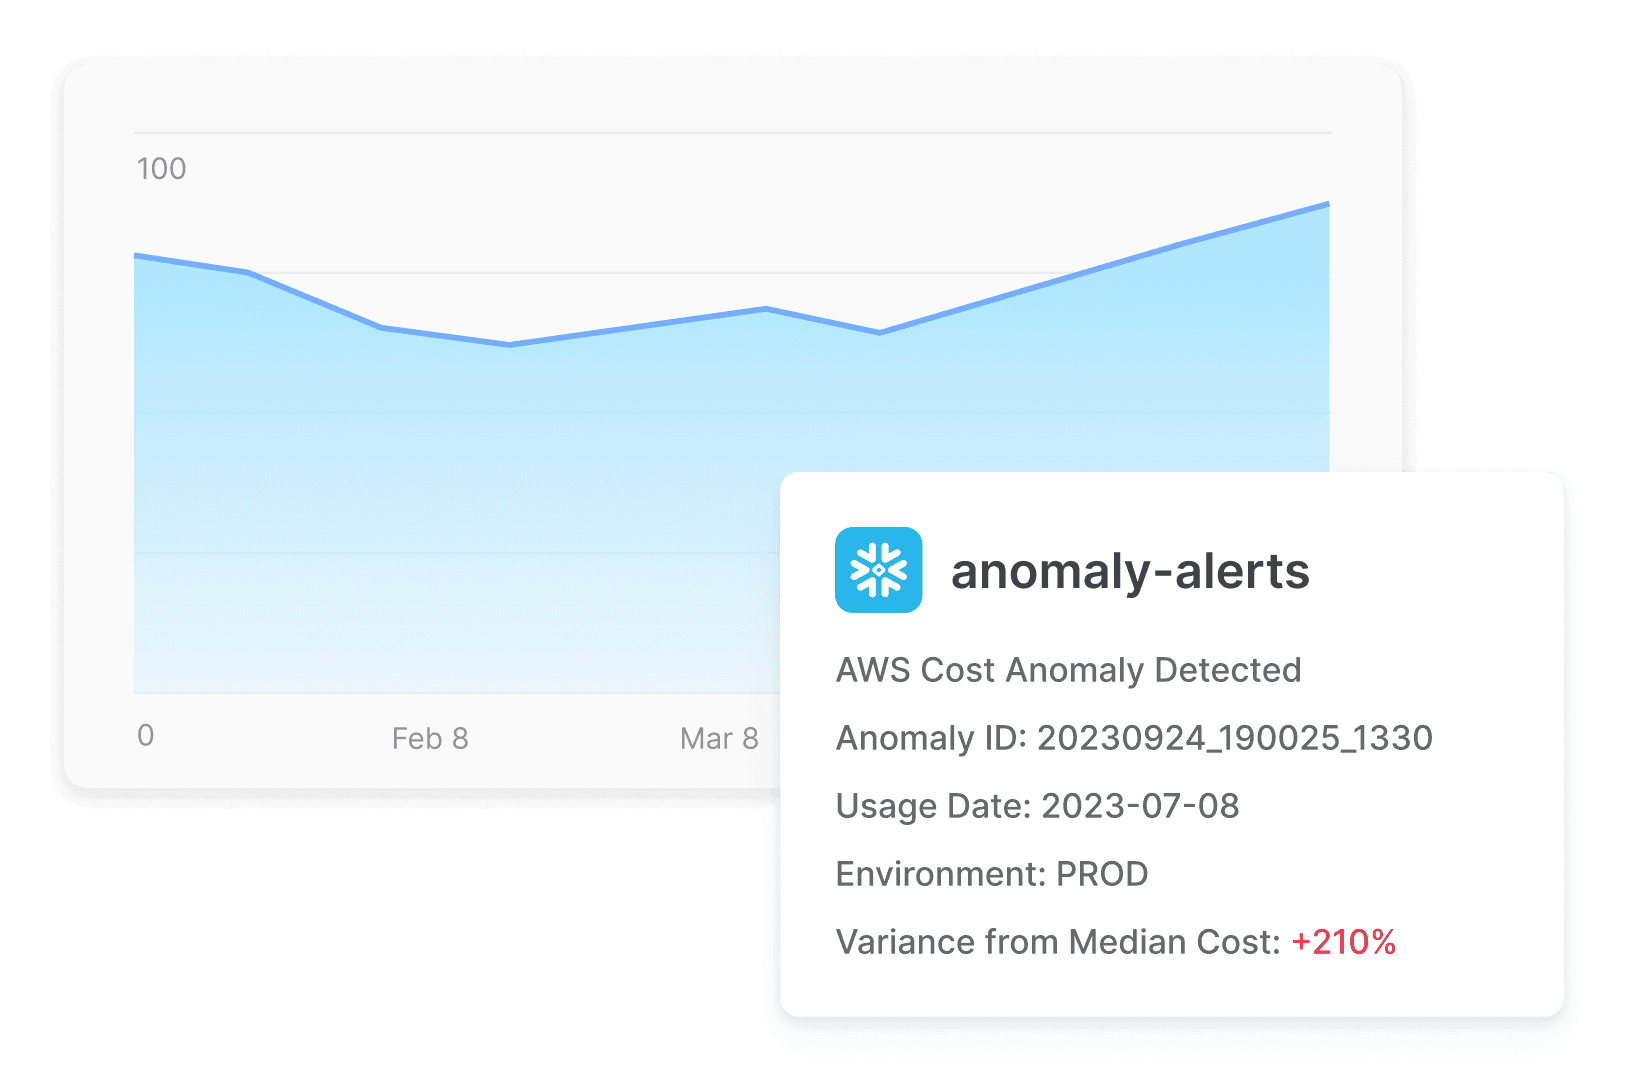 Anomaly alerts dashboard